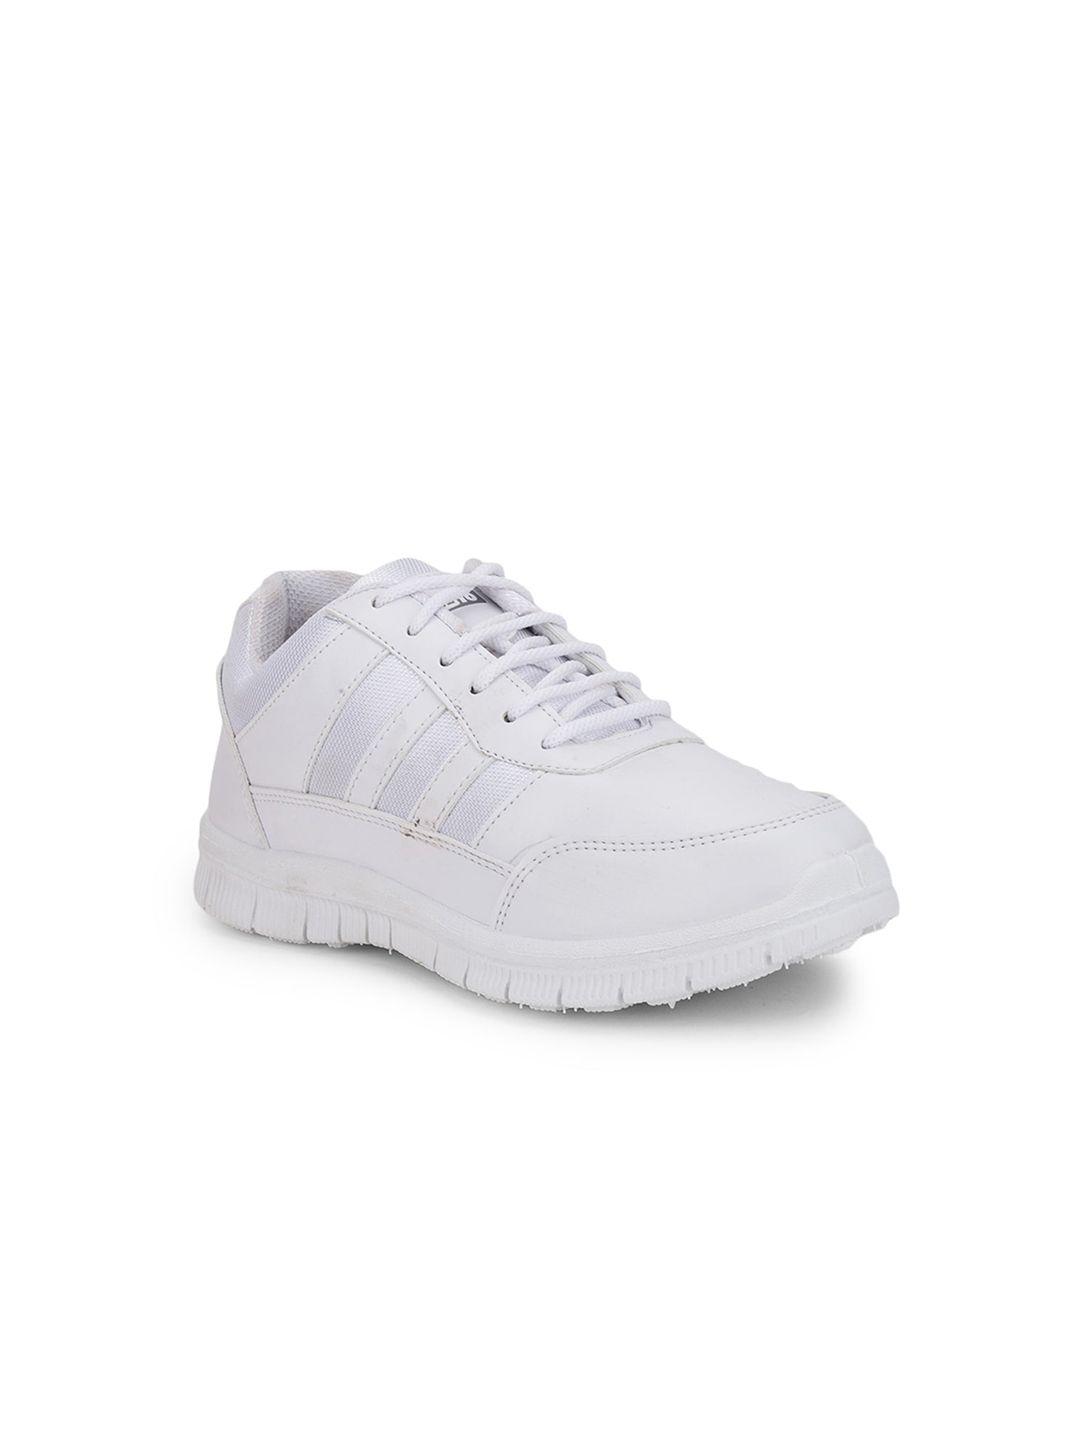 liberty-boys-white-synthetic-lace-ups-sneakers